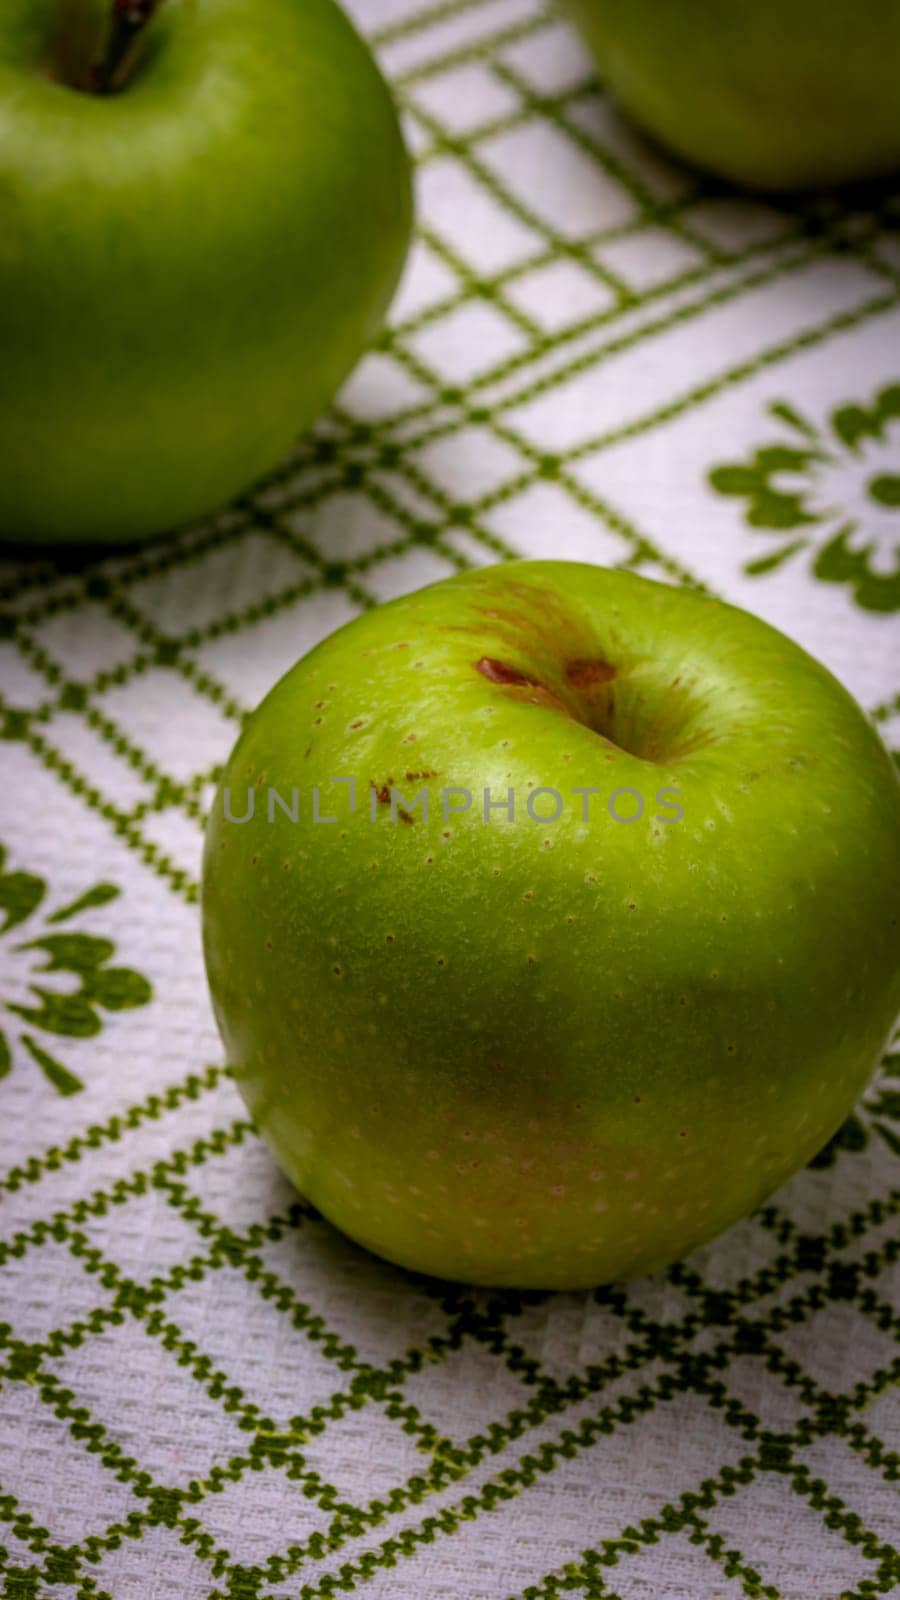  Ripe green apples on a rustic napkin on wooden table. by vladispas